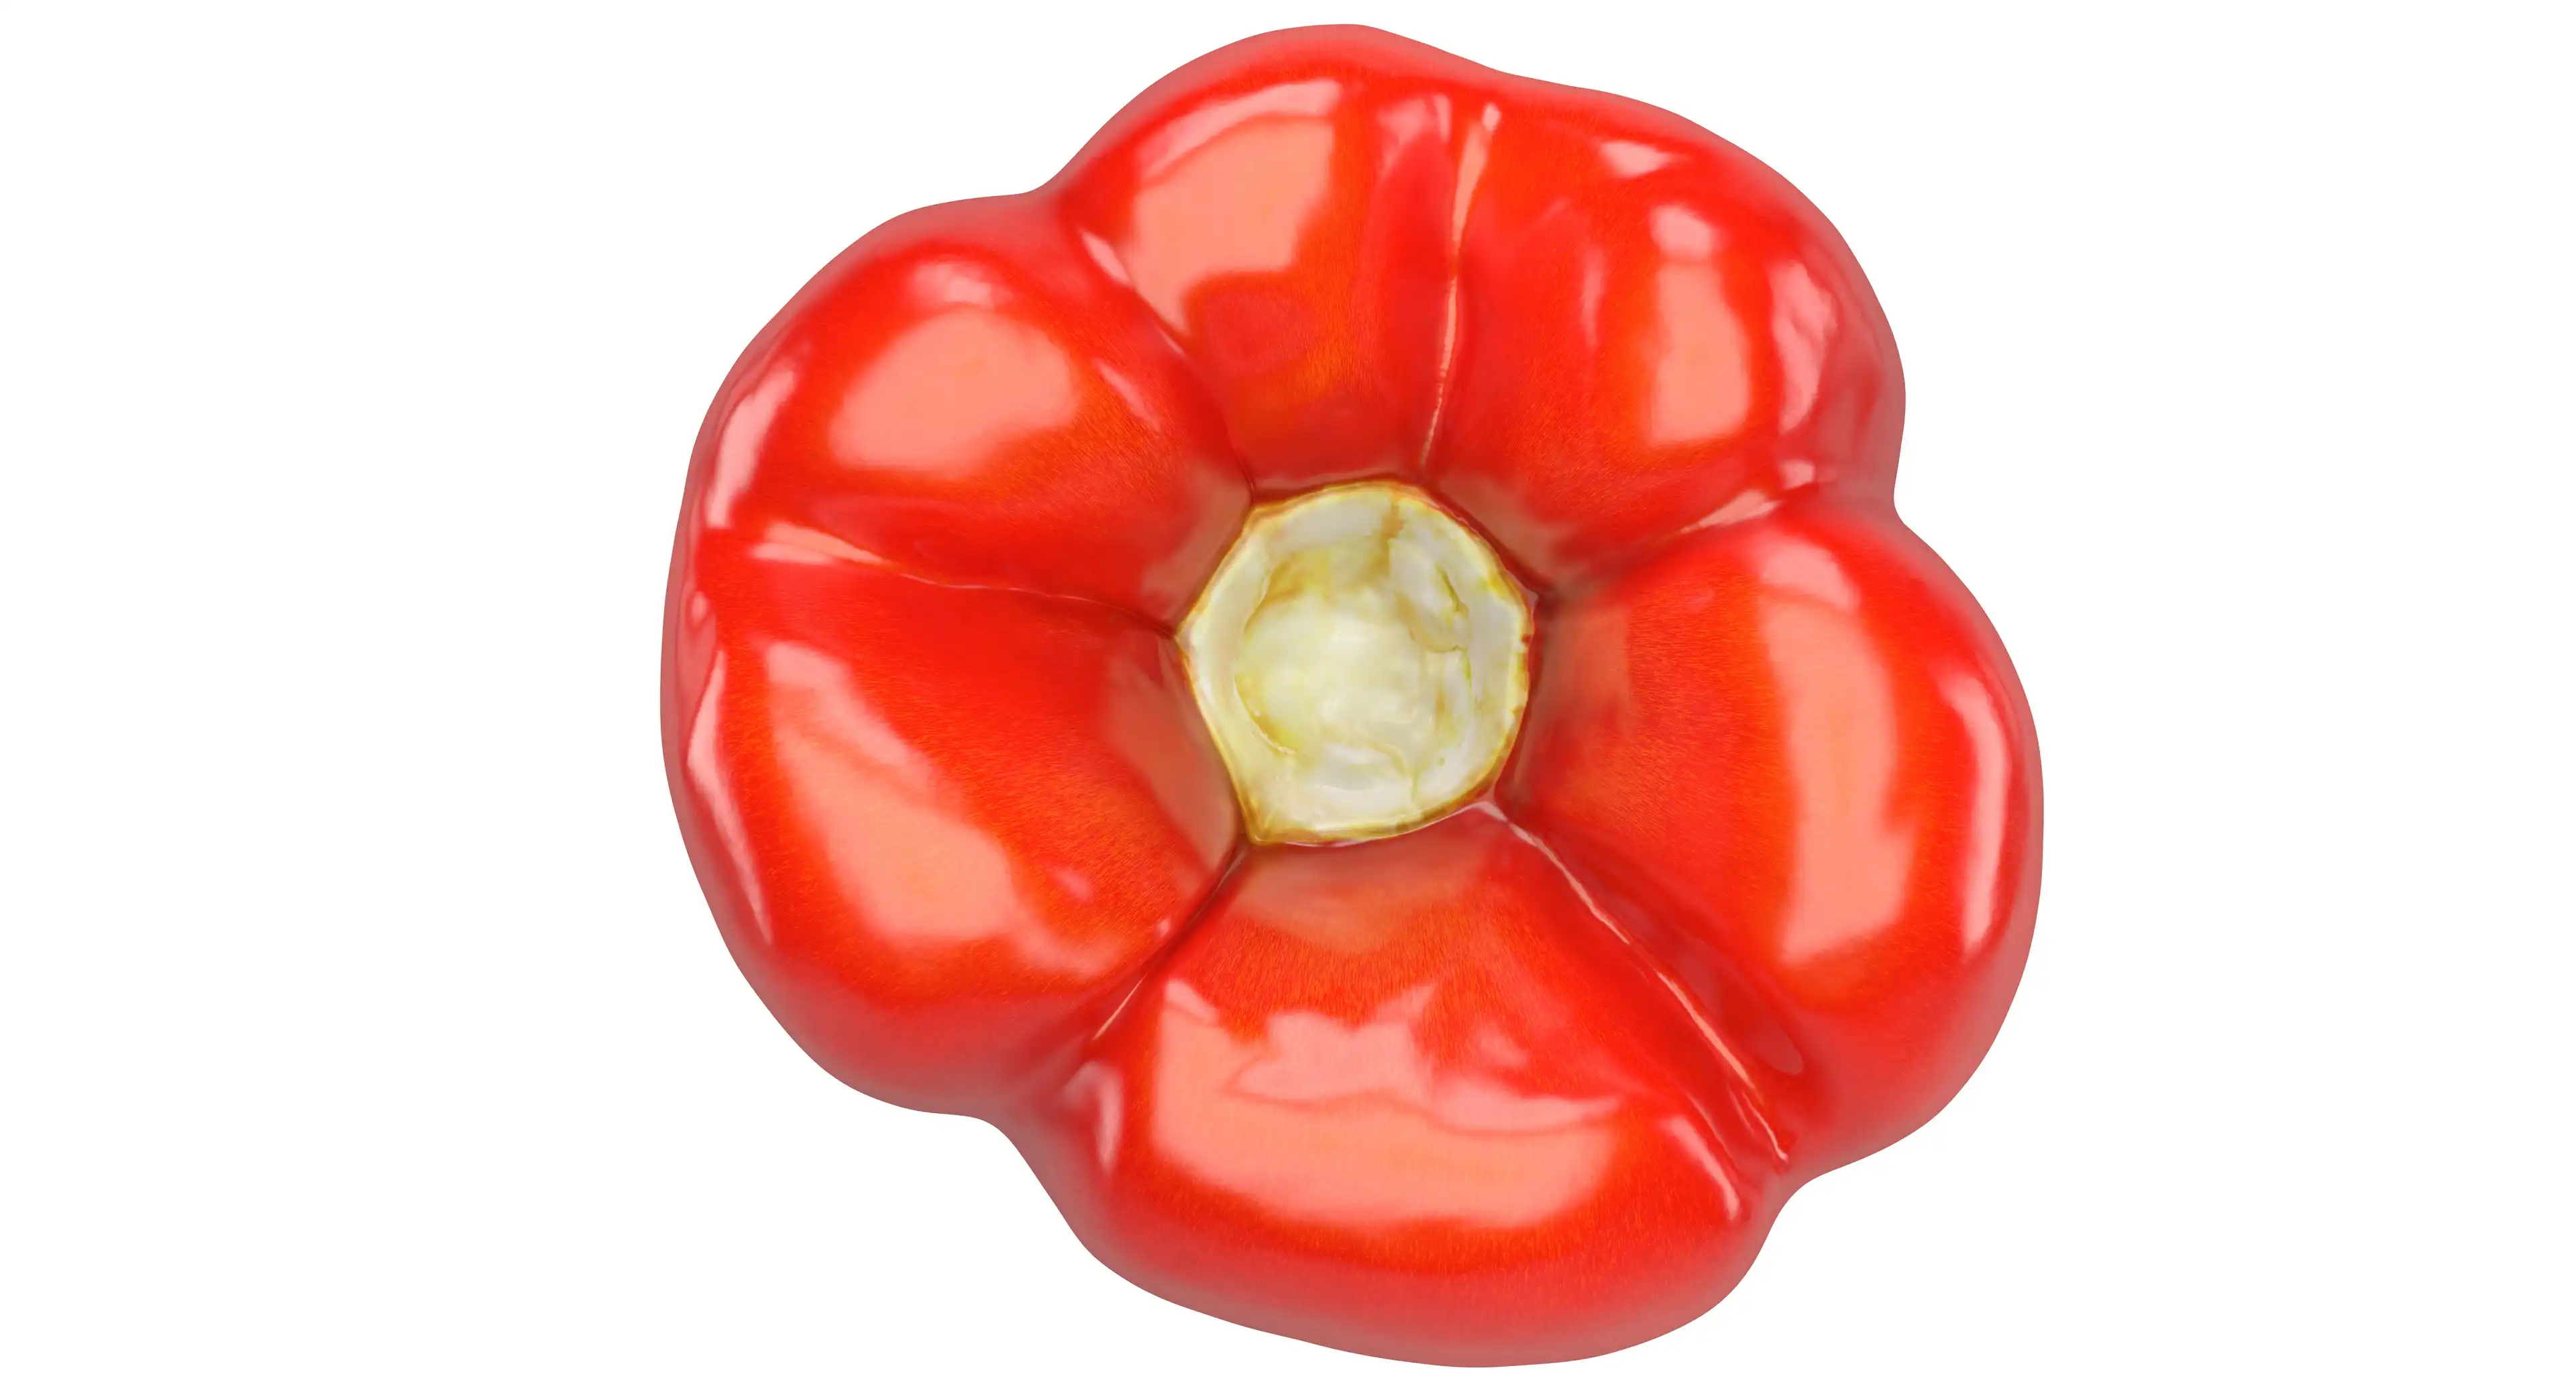 Top view of red bell pepper 3d model. The stump is shown here. This visualization literally shows what is under the green trunk, if you detach it from the bell pepper 3d model complete assembly.